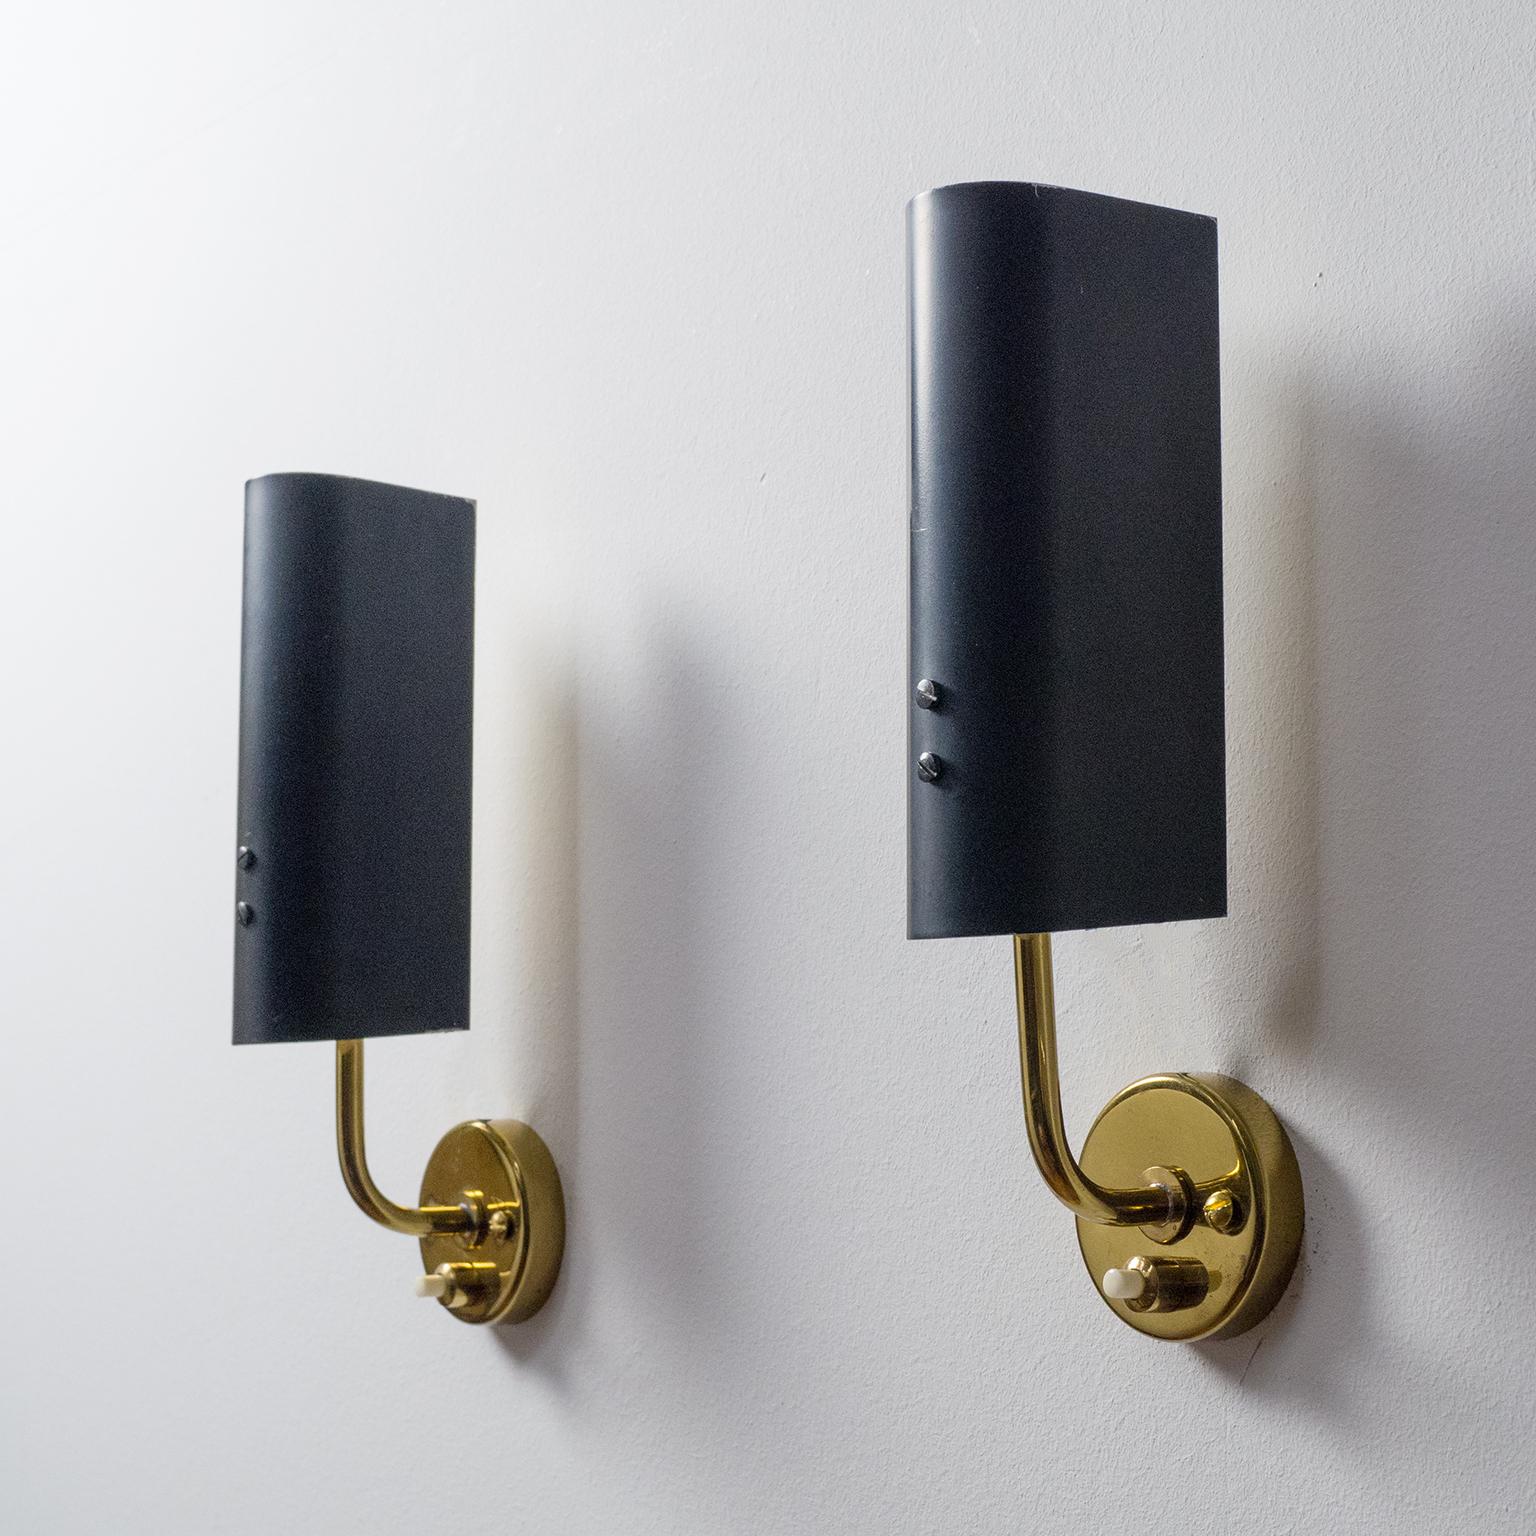 Wonderful pair of French modernist wall lights by Disderot, 1950s. Compact in size these are very versatile: The shades can be rotated 360º and the same goes for the entire unit, allowing for a multitude of positions and uses. Very good original